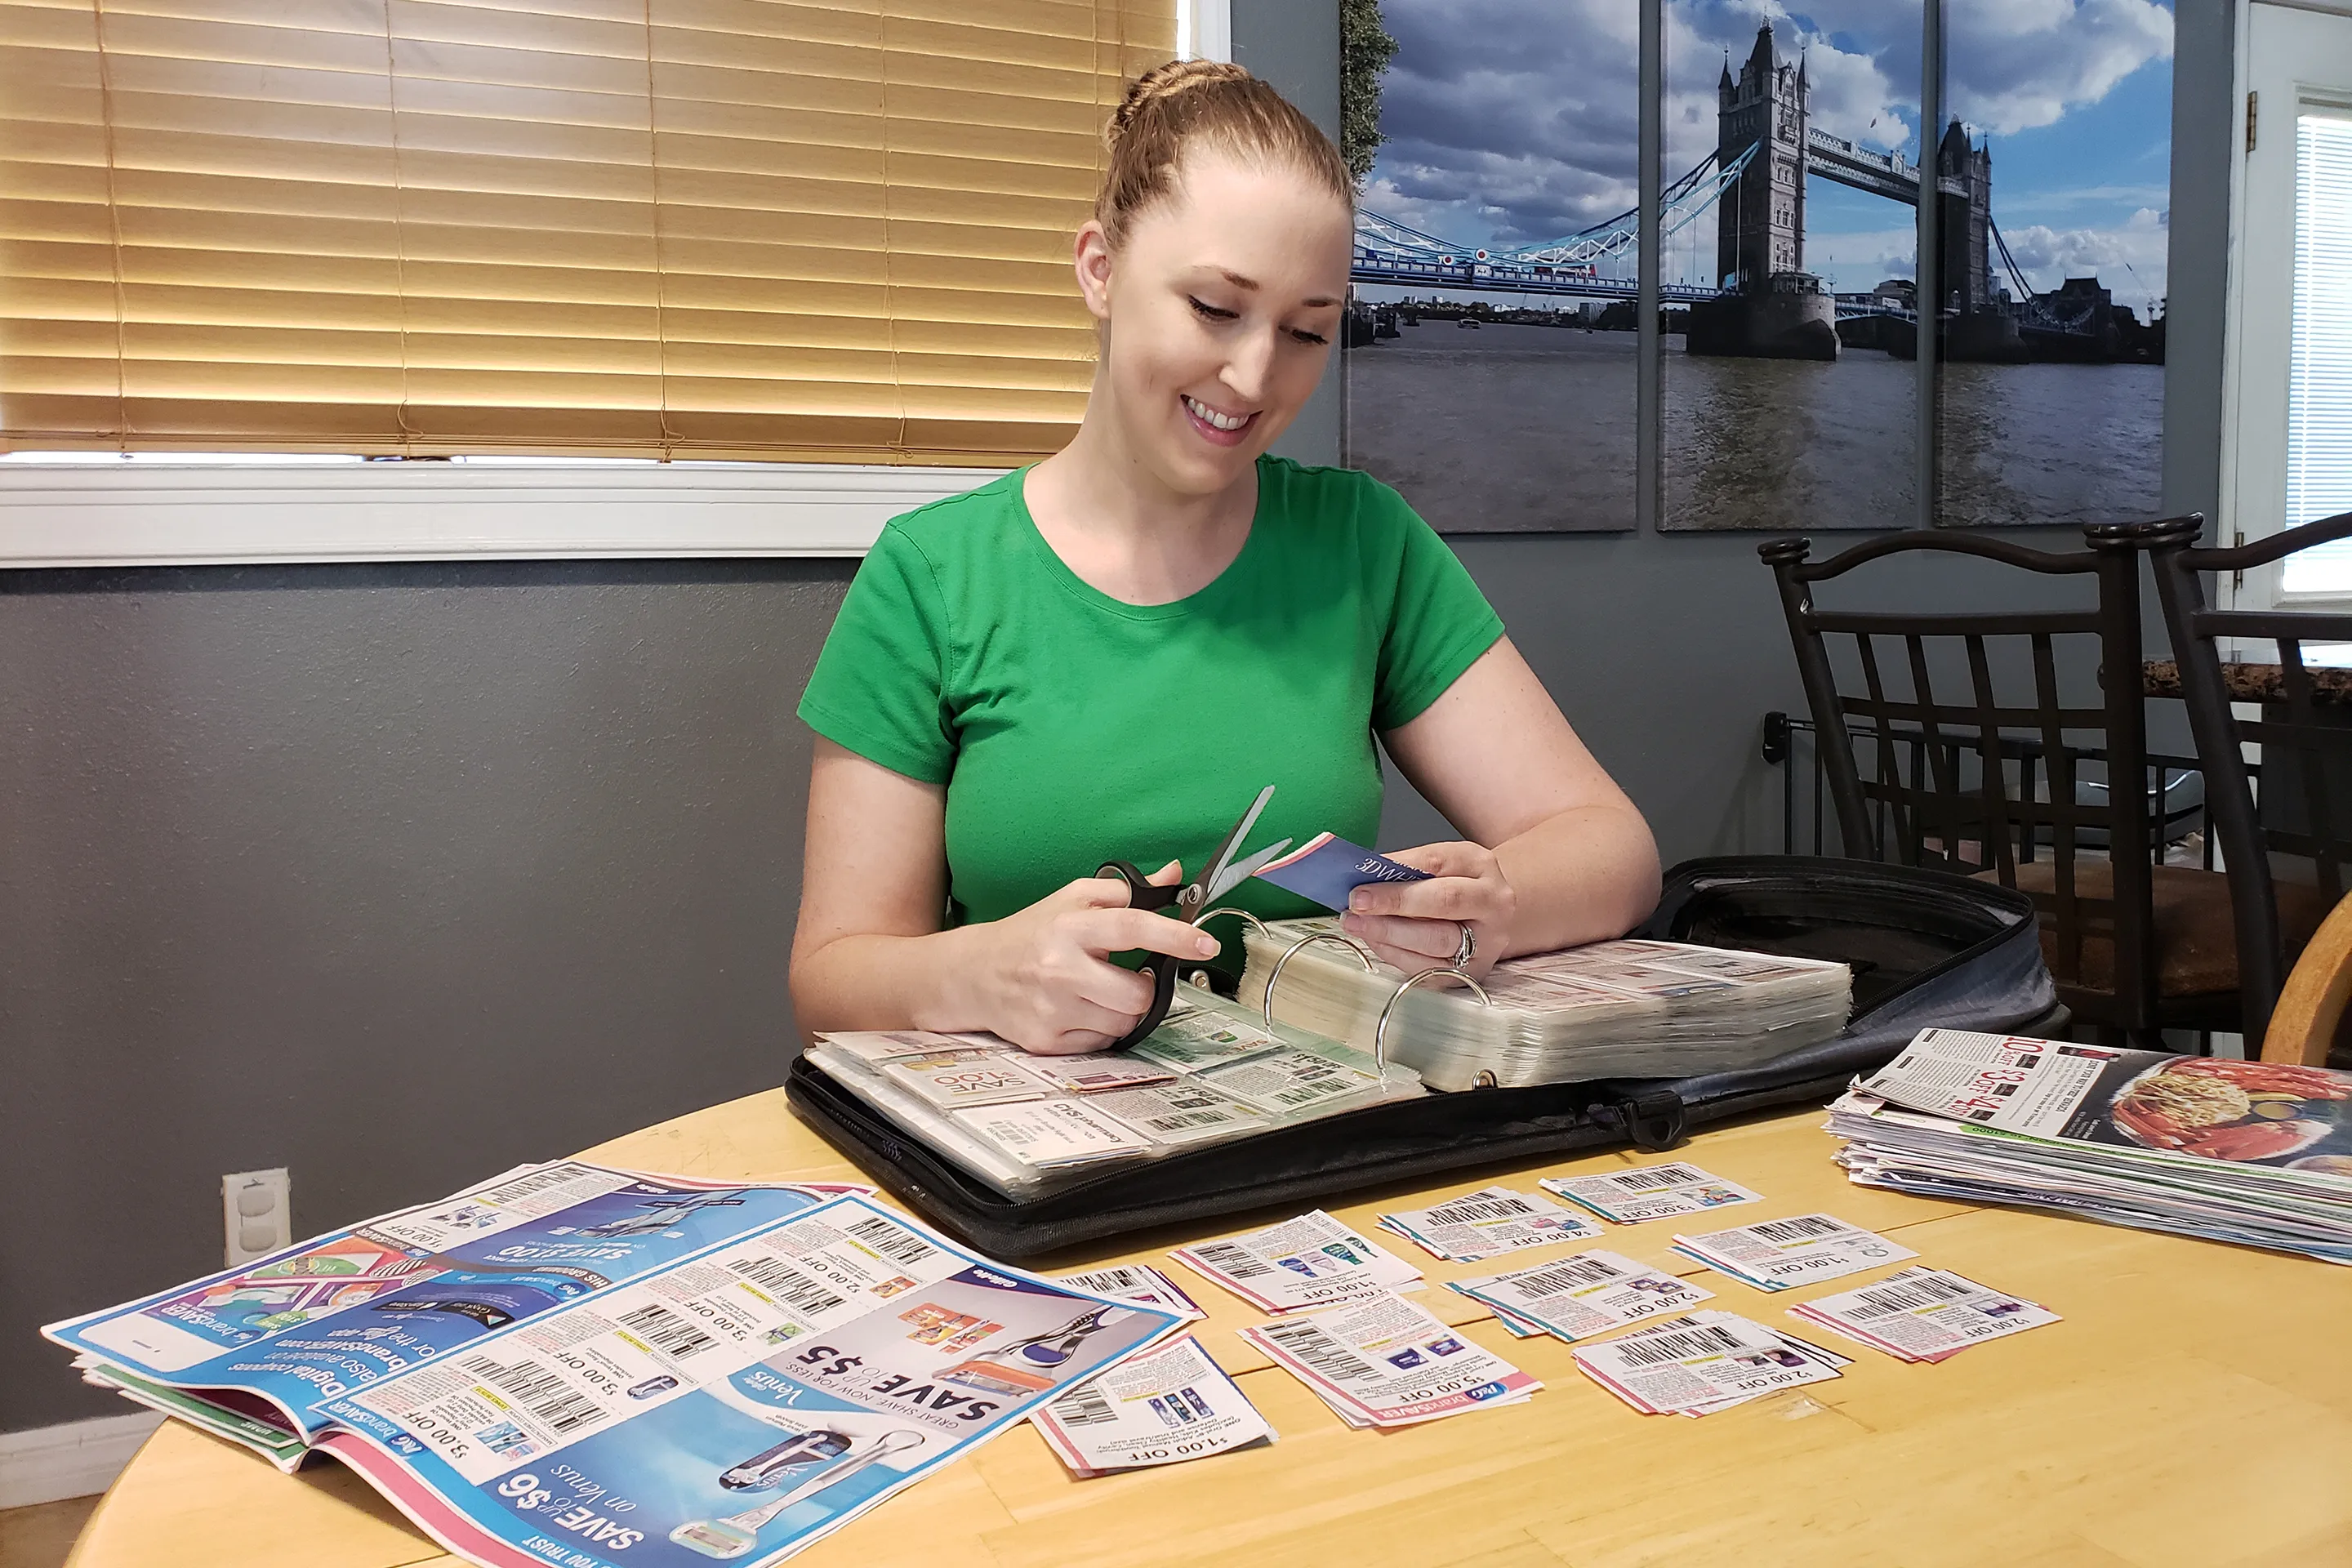 This 31-Year-Old Saves $8,000 a Year Clipping Coupons. Here Are Her Secrets to Success